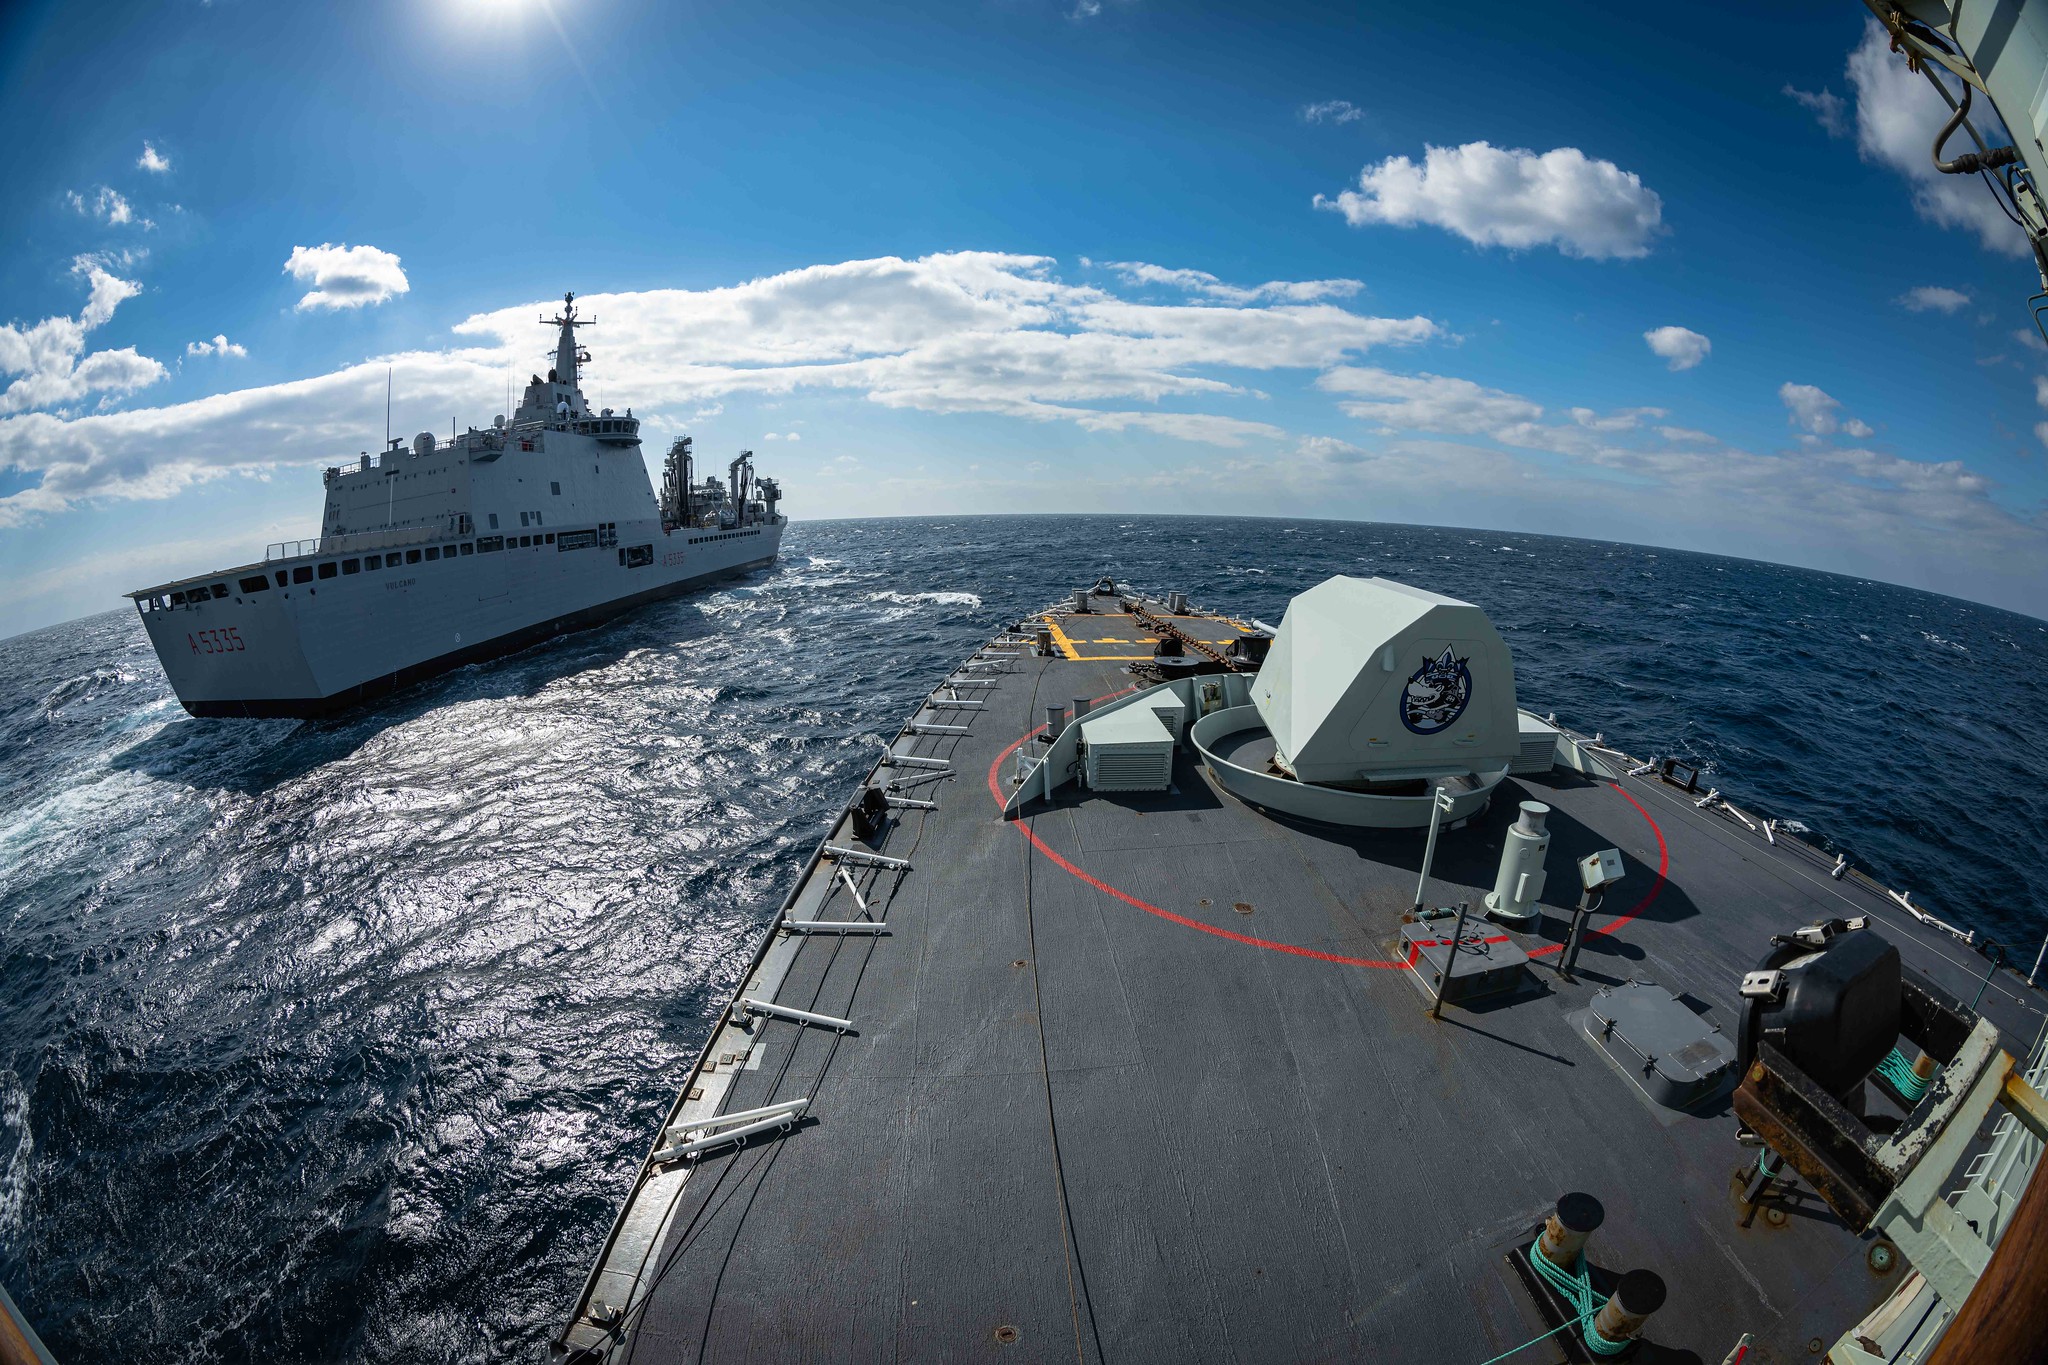 Operation REASSURANCE-MTF <br>
HMCS MONTREAL approaches ITS Vulcano for a replenishment at sea during Operation REASSURANCE, in the Mediterranean Sea on March 15, 2022. (Photo: Corporal Braden Trudeau Canadian Armed Forces)